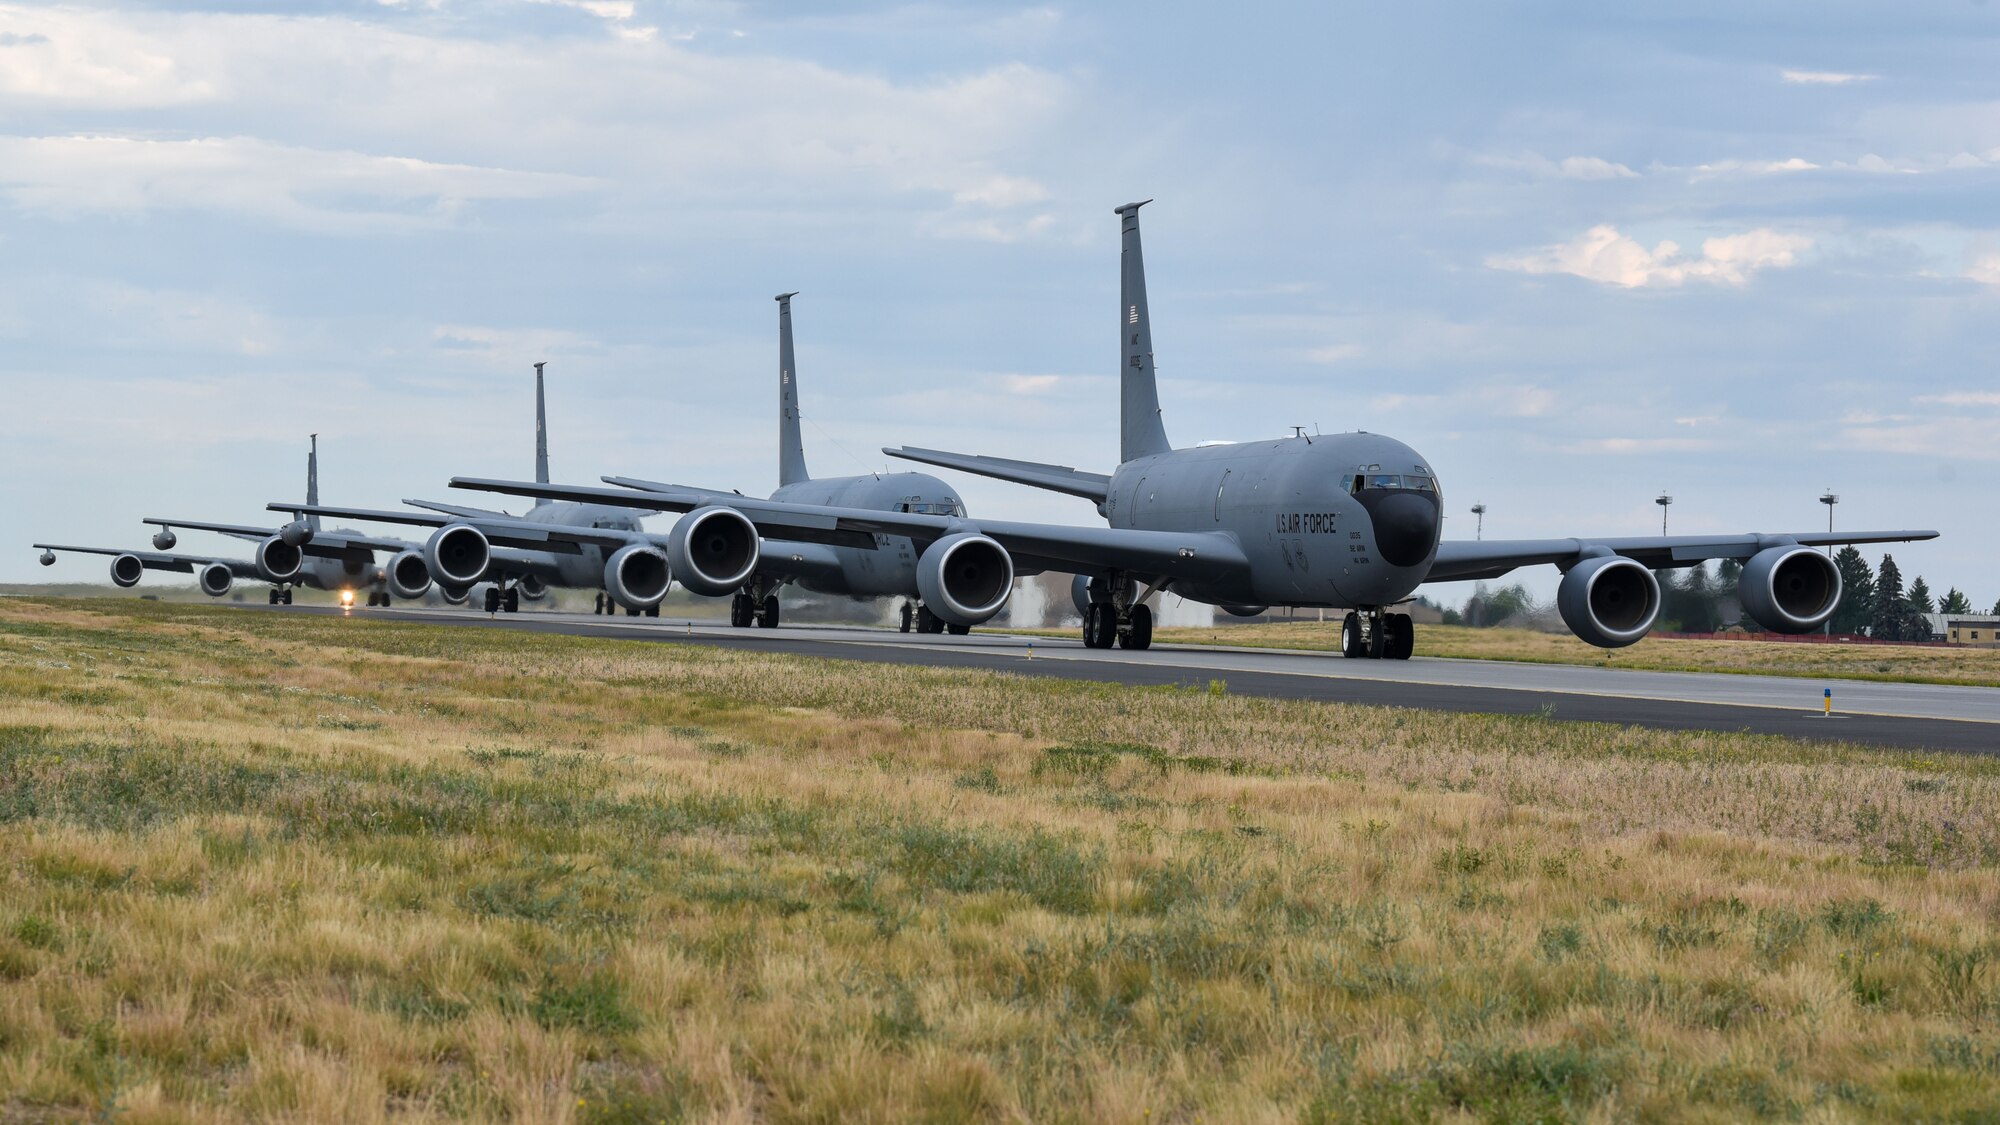 KC-135 Stratotankers assigned to the 92nd Air Refueling Wing and 141st Air Refueling Wing taxi into position before takeoff  as part of Operation Centennial Contact at Fairchild Air force Base, Washington, June 27, 2023. The movement, which included stops at Yellowstone National Park, Mount Rushmore and Glacier National Park, was part of Air Mobility Command’s celebration of 100 years air refueling operations and demonstrated the 92nd Air Refueling Wing’s global reach capabilities. Since its inception in 1923, Air refueling has become a crucial component of military and civilian aviation operations around the world by extending the range and endurance of aircraft and enabling them to complete missions that would otherwise be impossible or require multiple stops. As a result, this capability is essential for strategic and tactical operations, as well as humanitarian relief efforts in support of AMC, U.S. Transportation Command and Department of Defense priorities. (U.S. Air Force photo by Airman 1st Class Lillian Patterson)